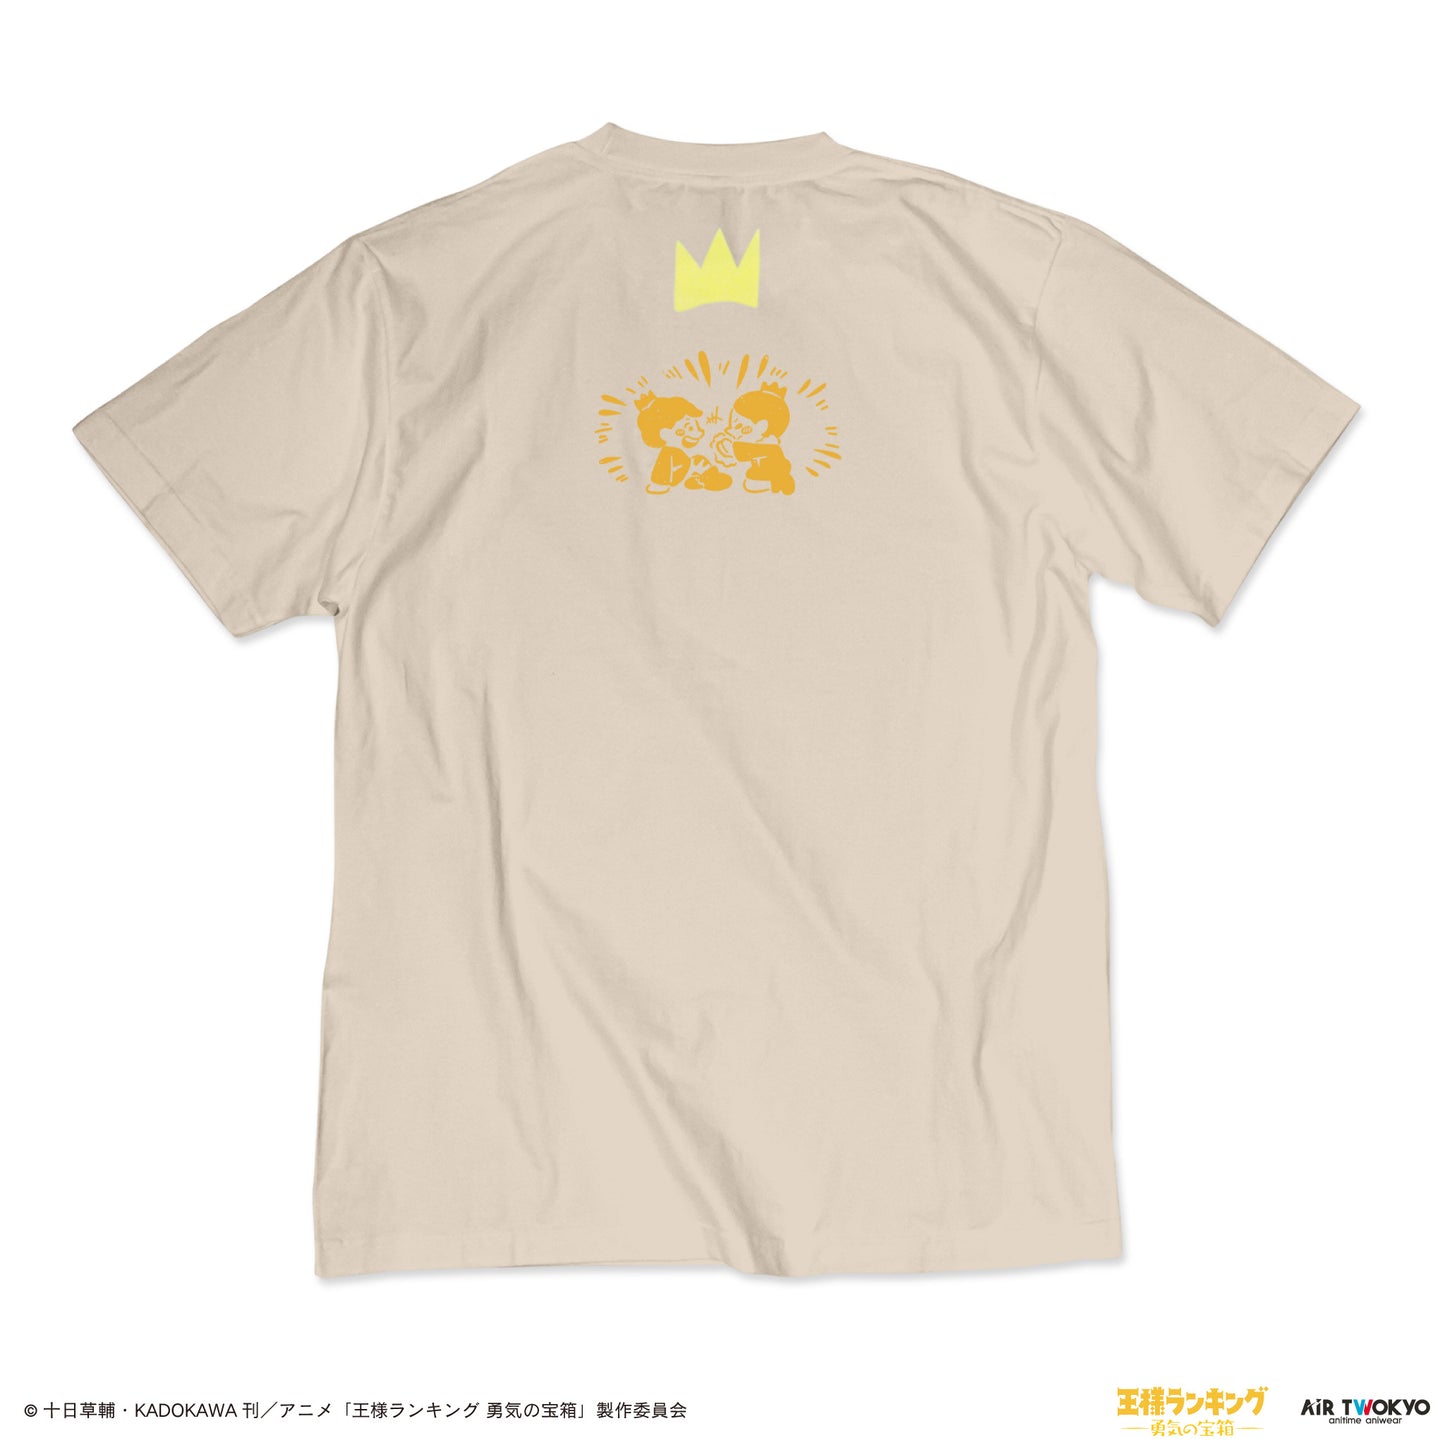 “Ranking of Kings: The Treasure Chest of Courage” scene illustration T-shirt 3